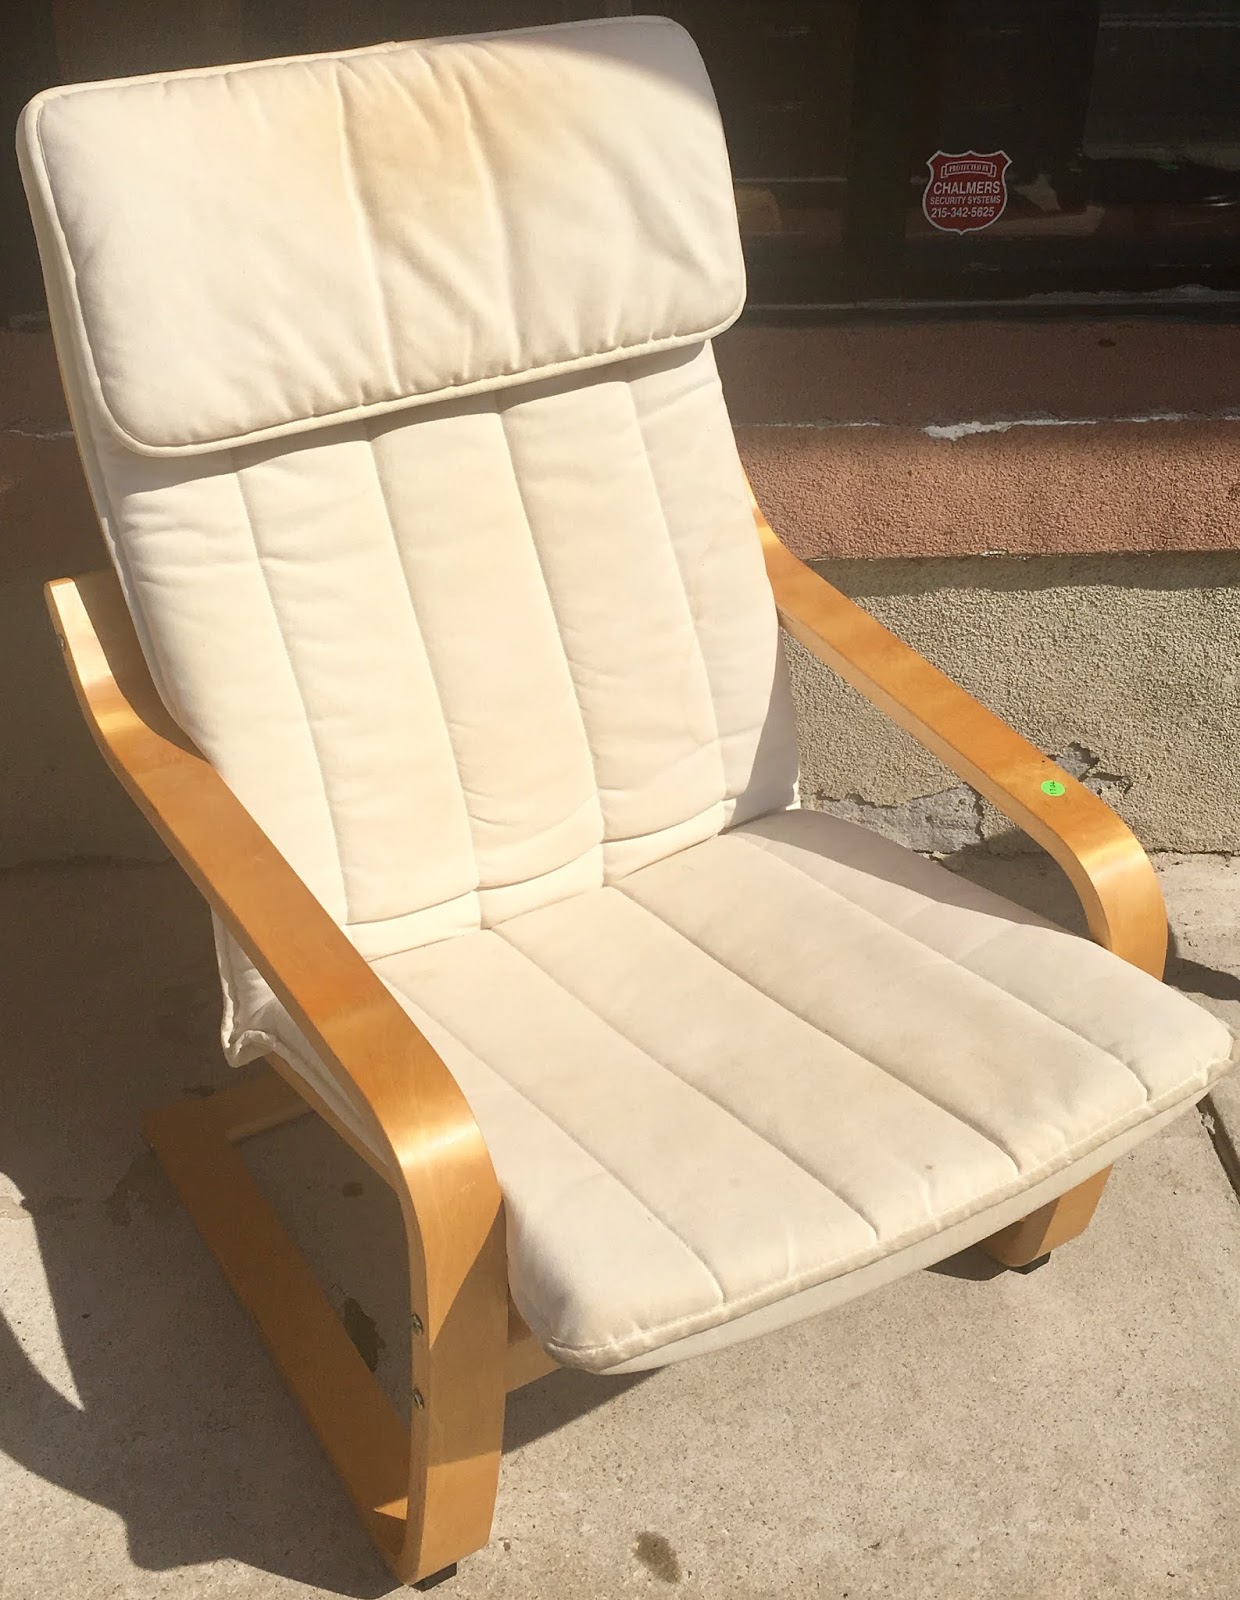 Uhuru Furniture & Collectibles: IKEA POÄNG Chair with Off White Cushion -  $35 Warehouse SOLD